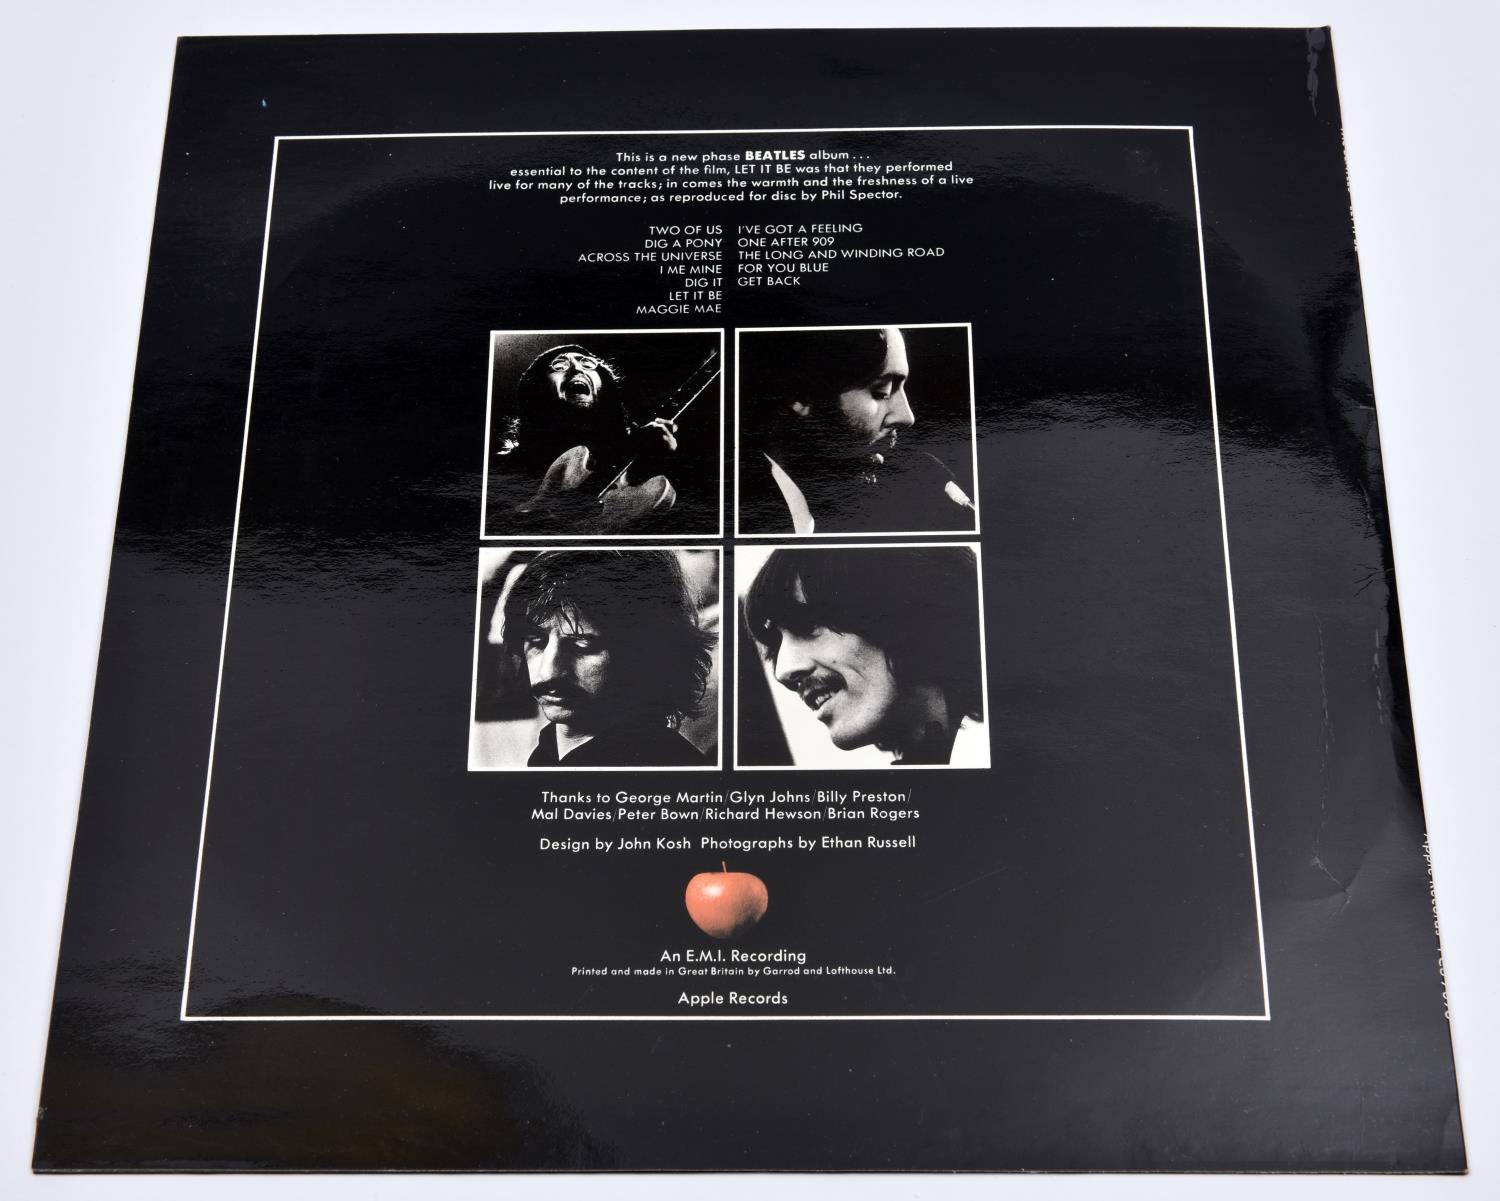 The Beatles - Let It Be 'box set'. Apple stereo 12" vinyl. Mfd in UK. 1970, YEX 773-2U. With book; - Image 2 of 3